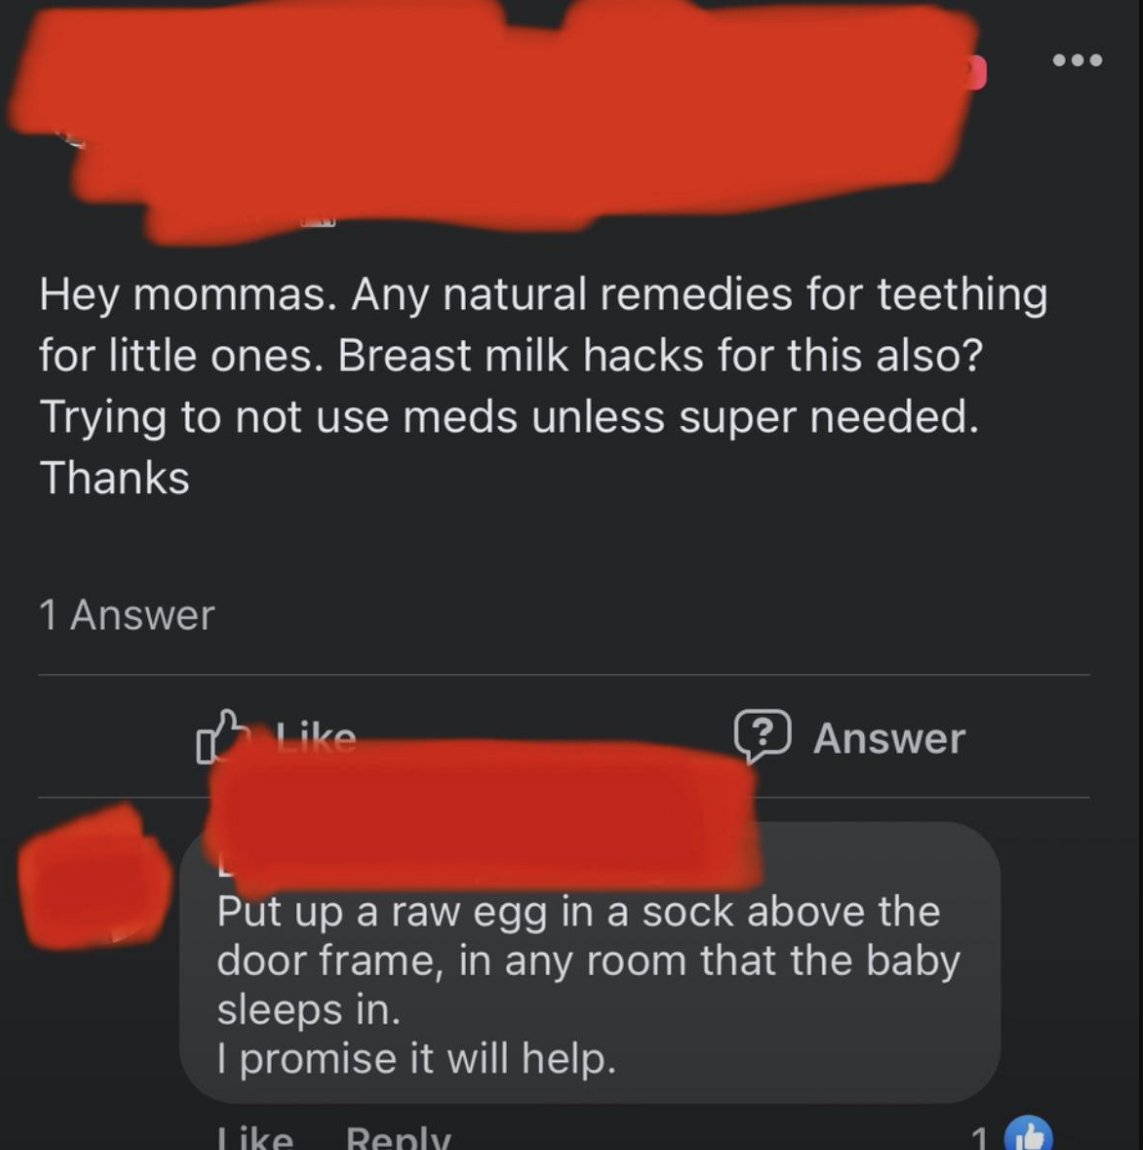 One mom asks for natural remedies for teething babies, and a response recommends putting a raw egg in a sock above the door frame of any room the baby sleeps in